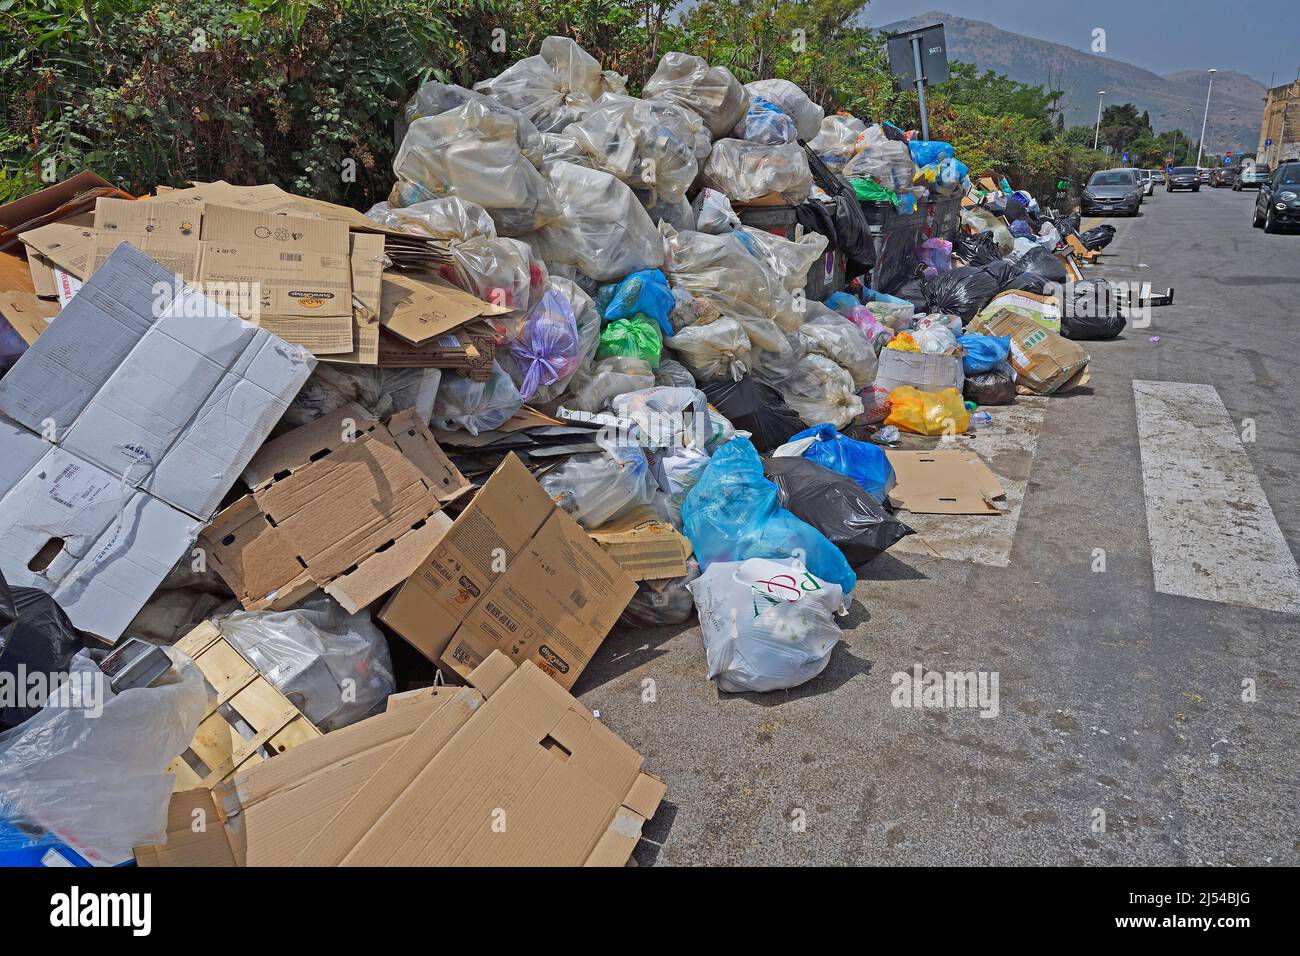 Piles of rubbish in the streeets of Palermo, Italy, Sicilia, Palermo Stock Photo